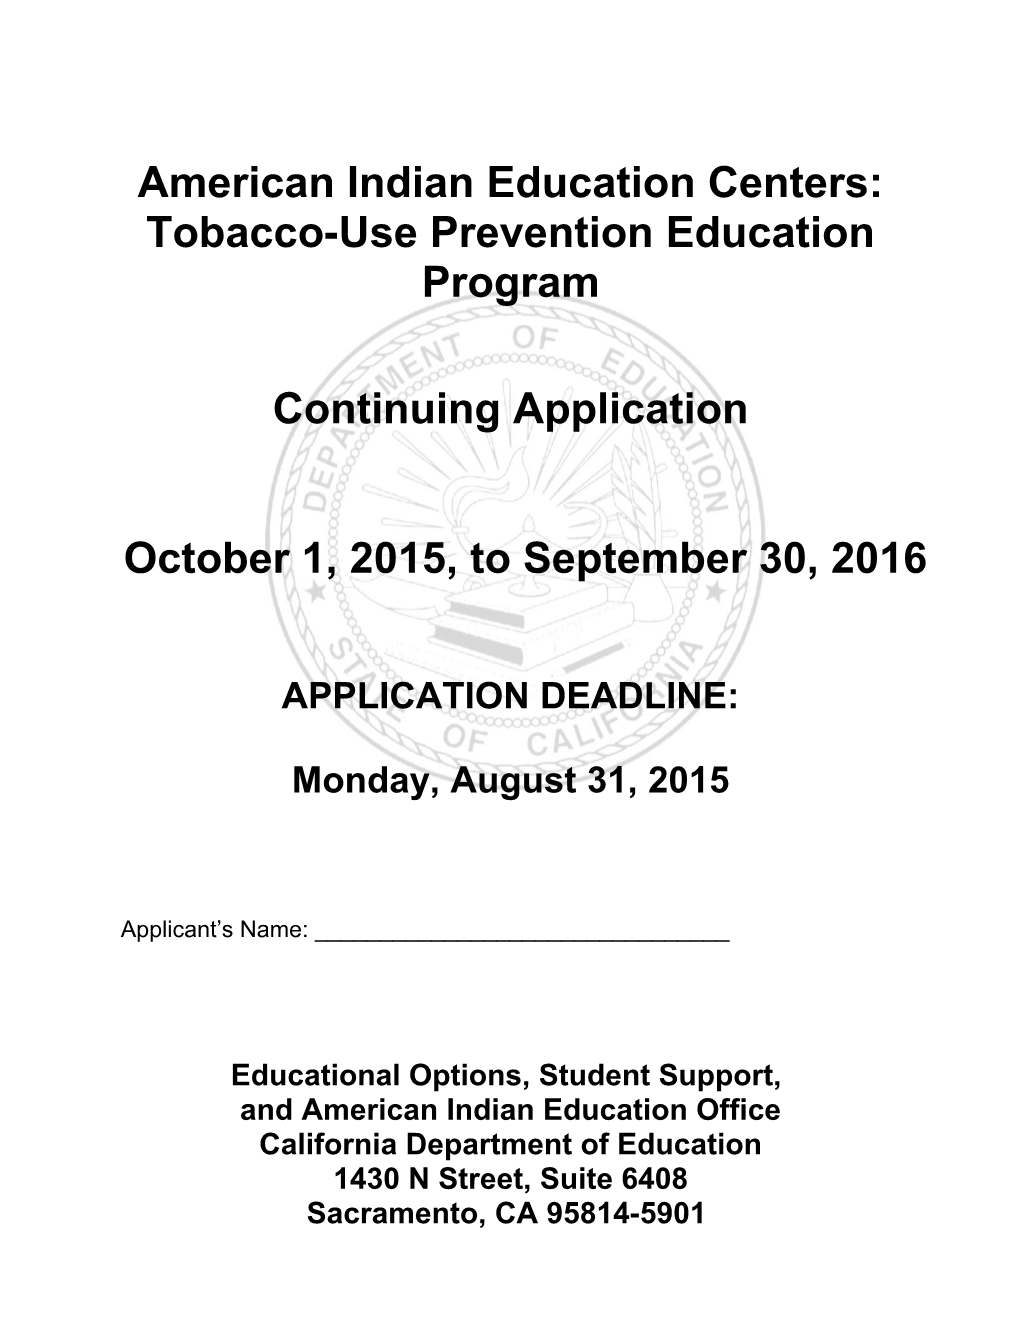 RFA-15: AIEC TUPE Continuing Application (CA Dept of Education)